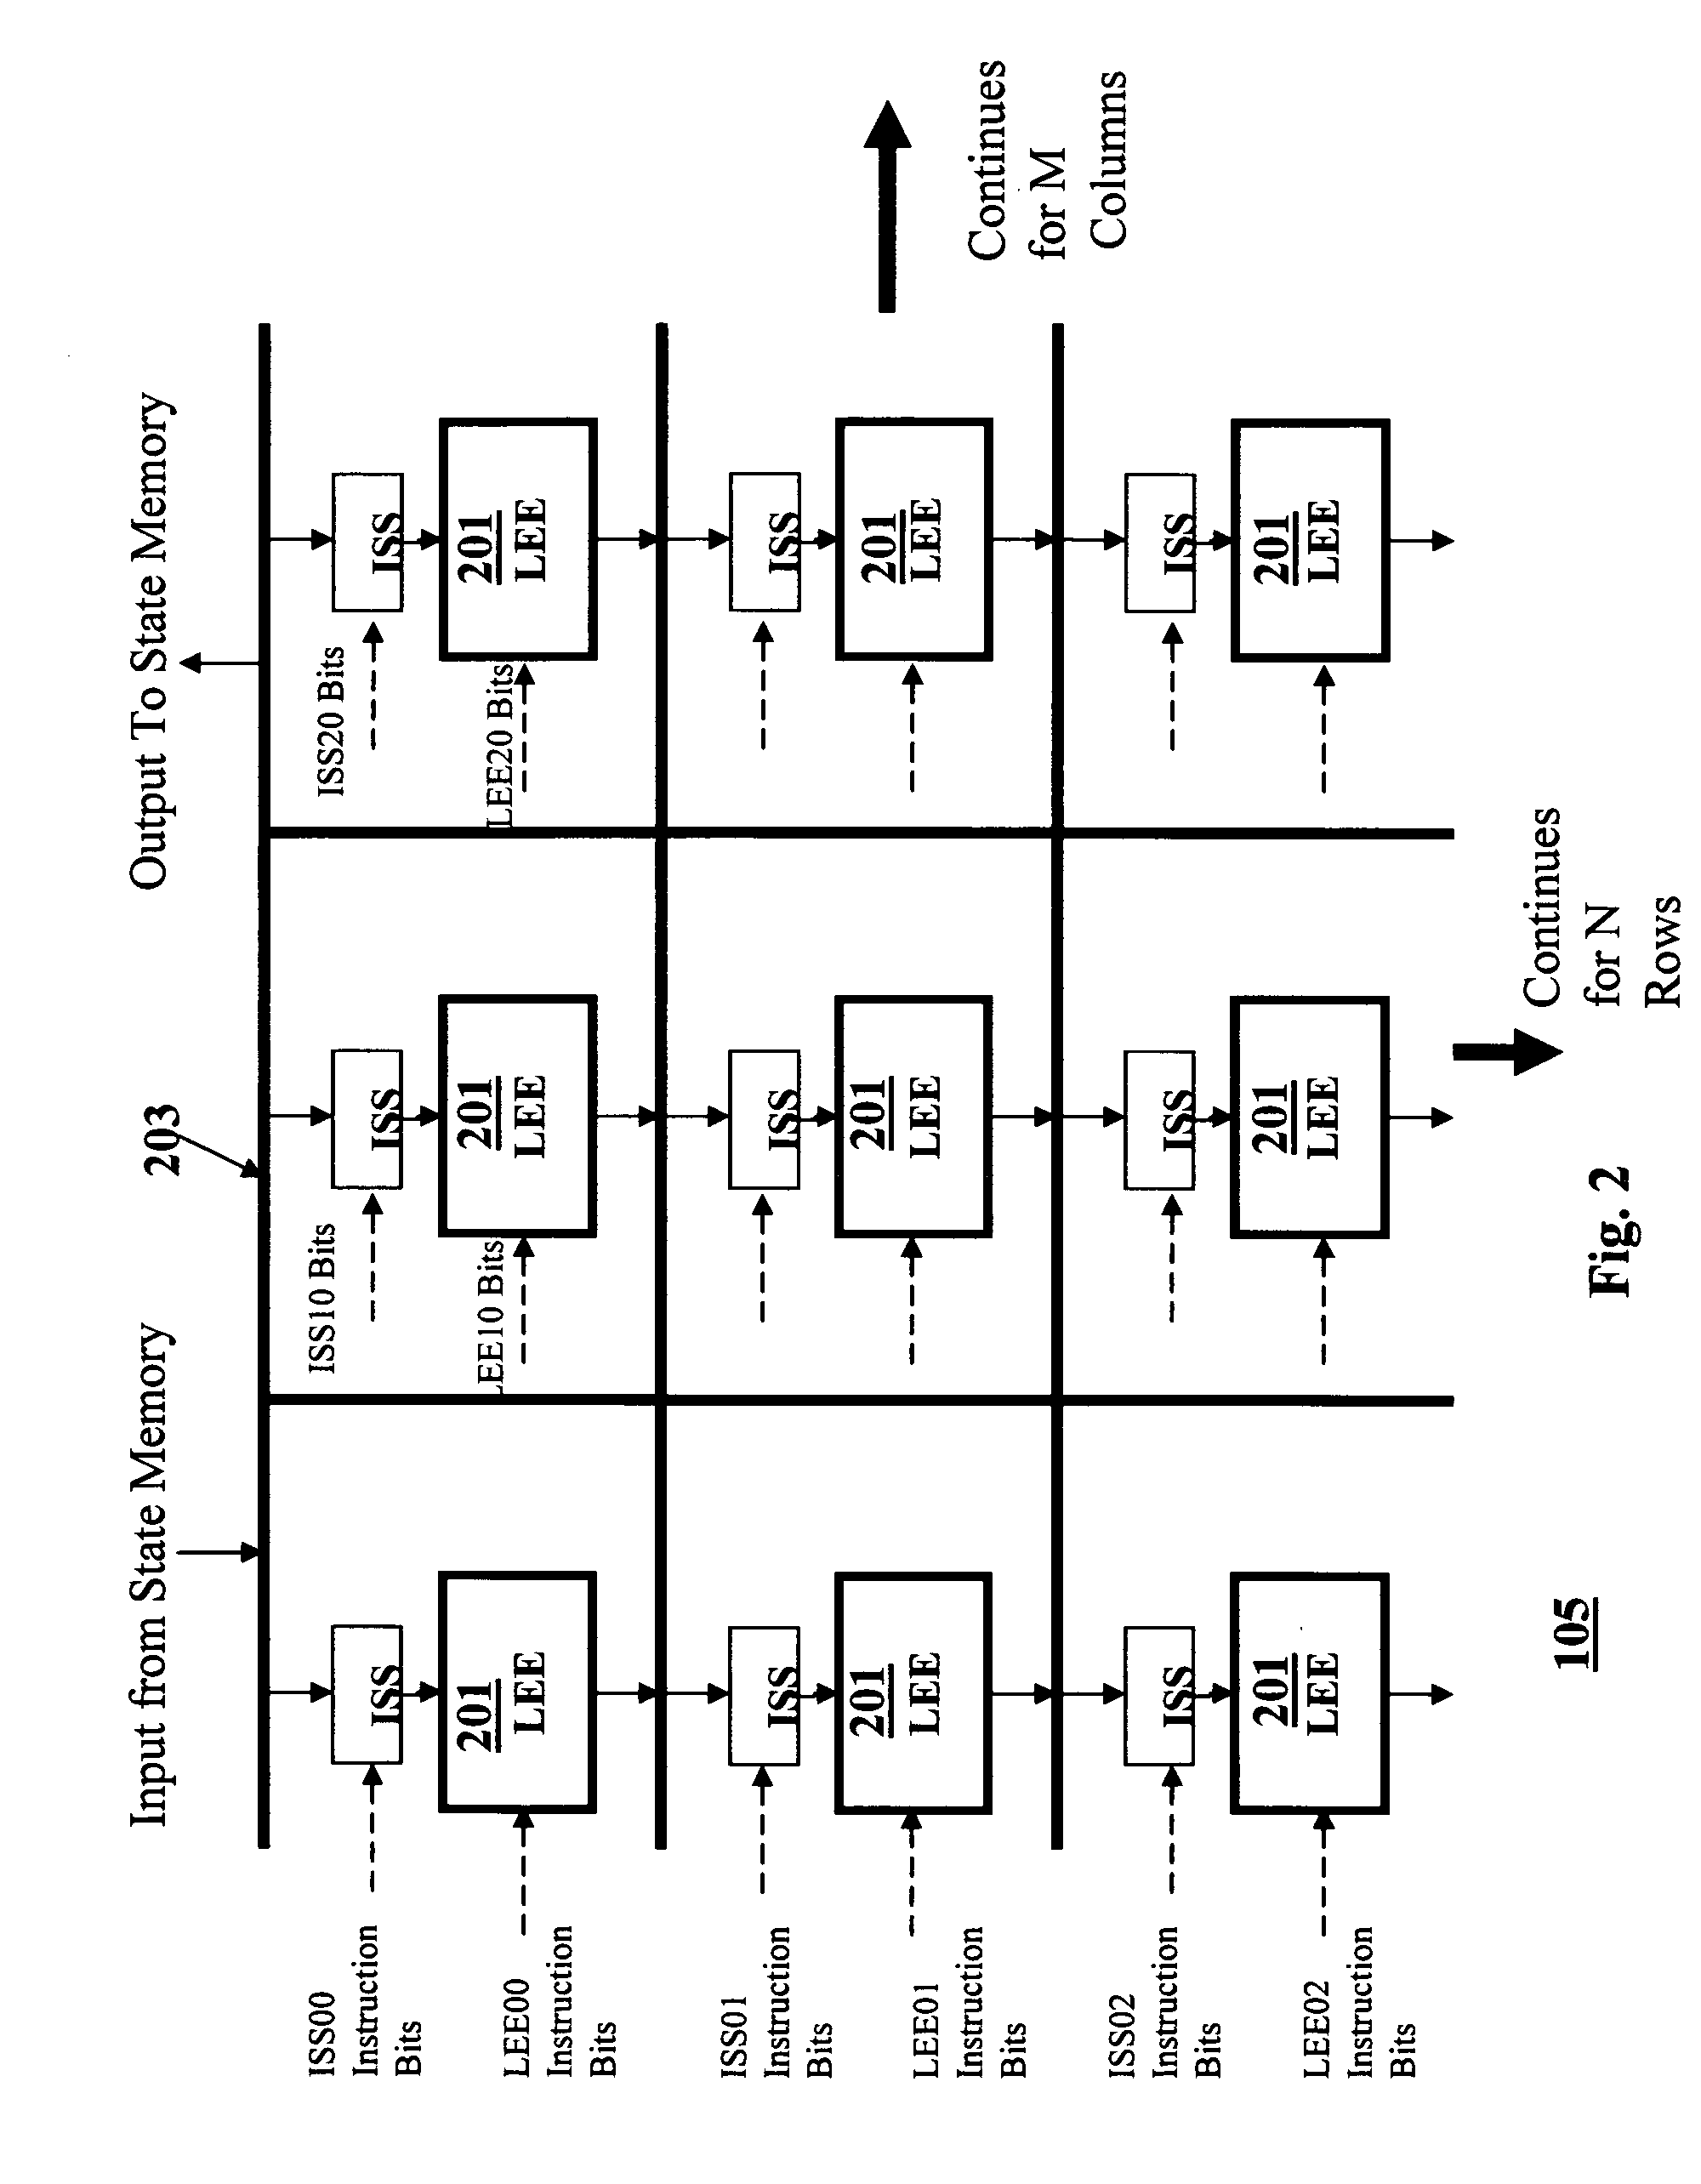 Programmable logic integrated circuit for digital algorithmic functions